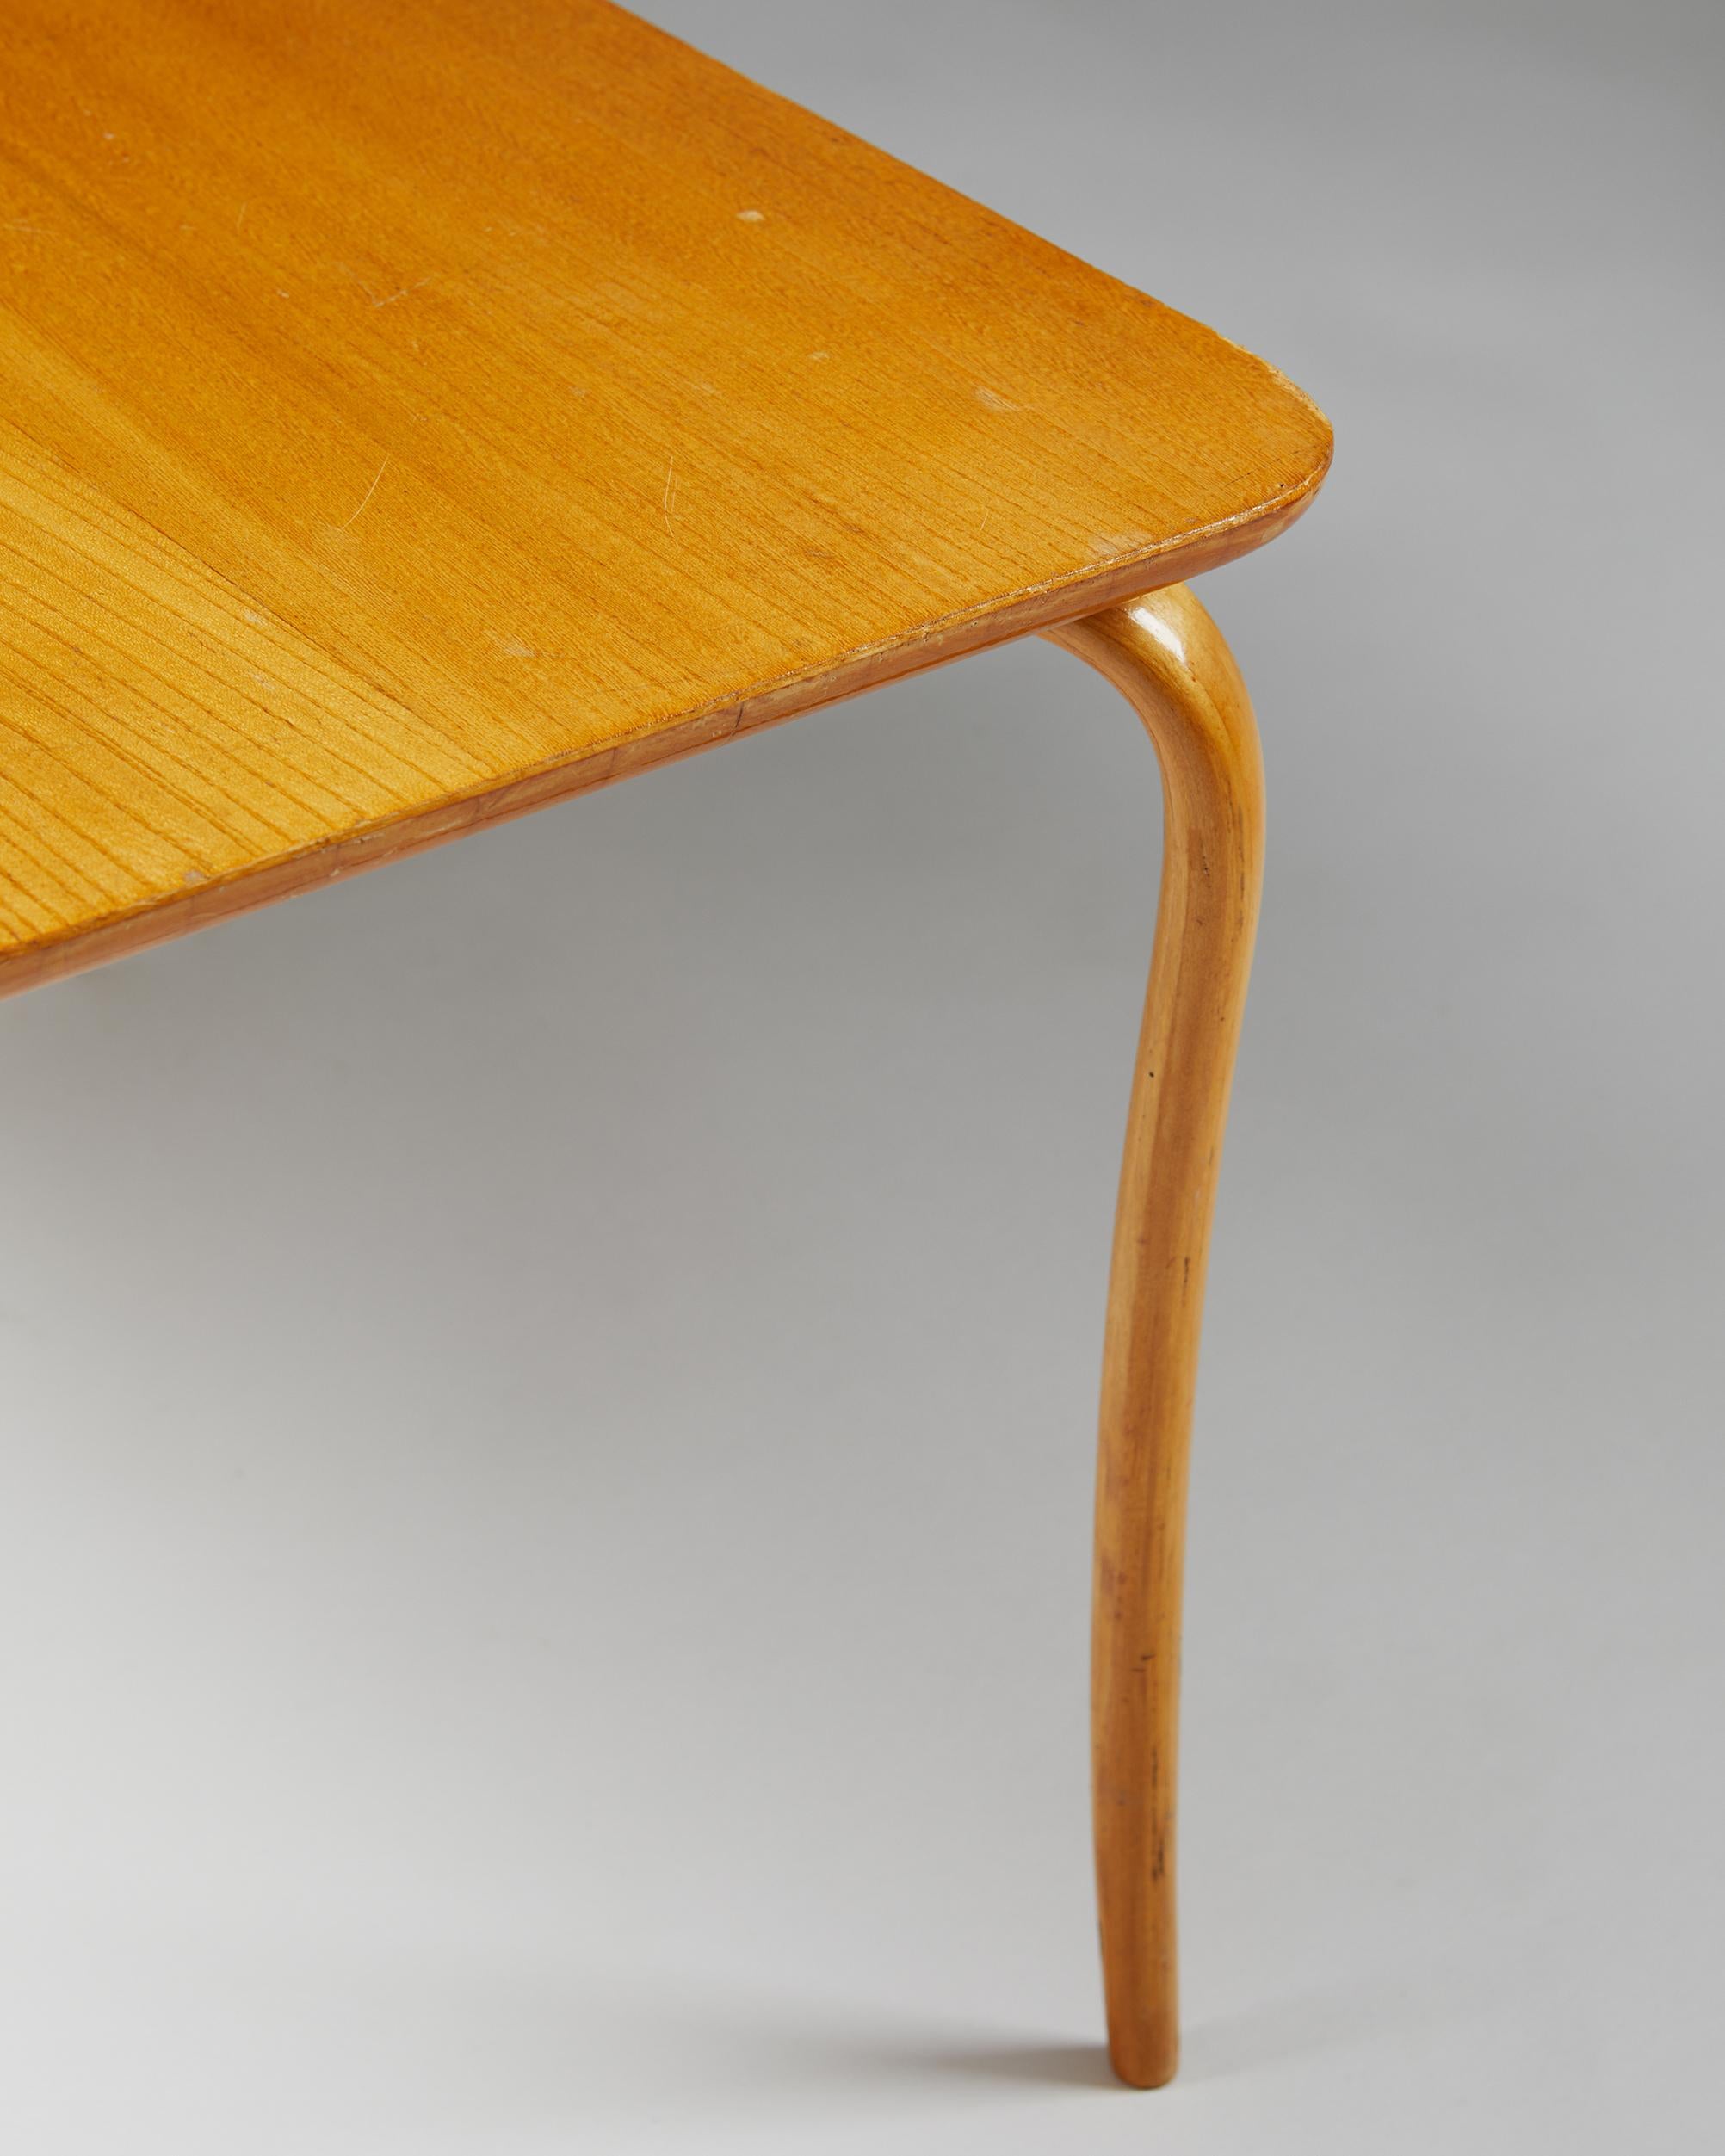 20th Century Table “Annika” Designed by Bruno Mathsson for Karl Mathsson, Sweden, 1950’s For Sale